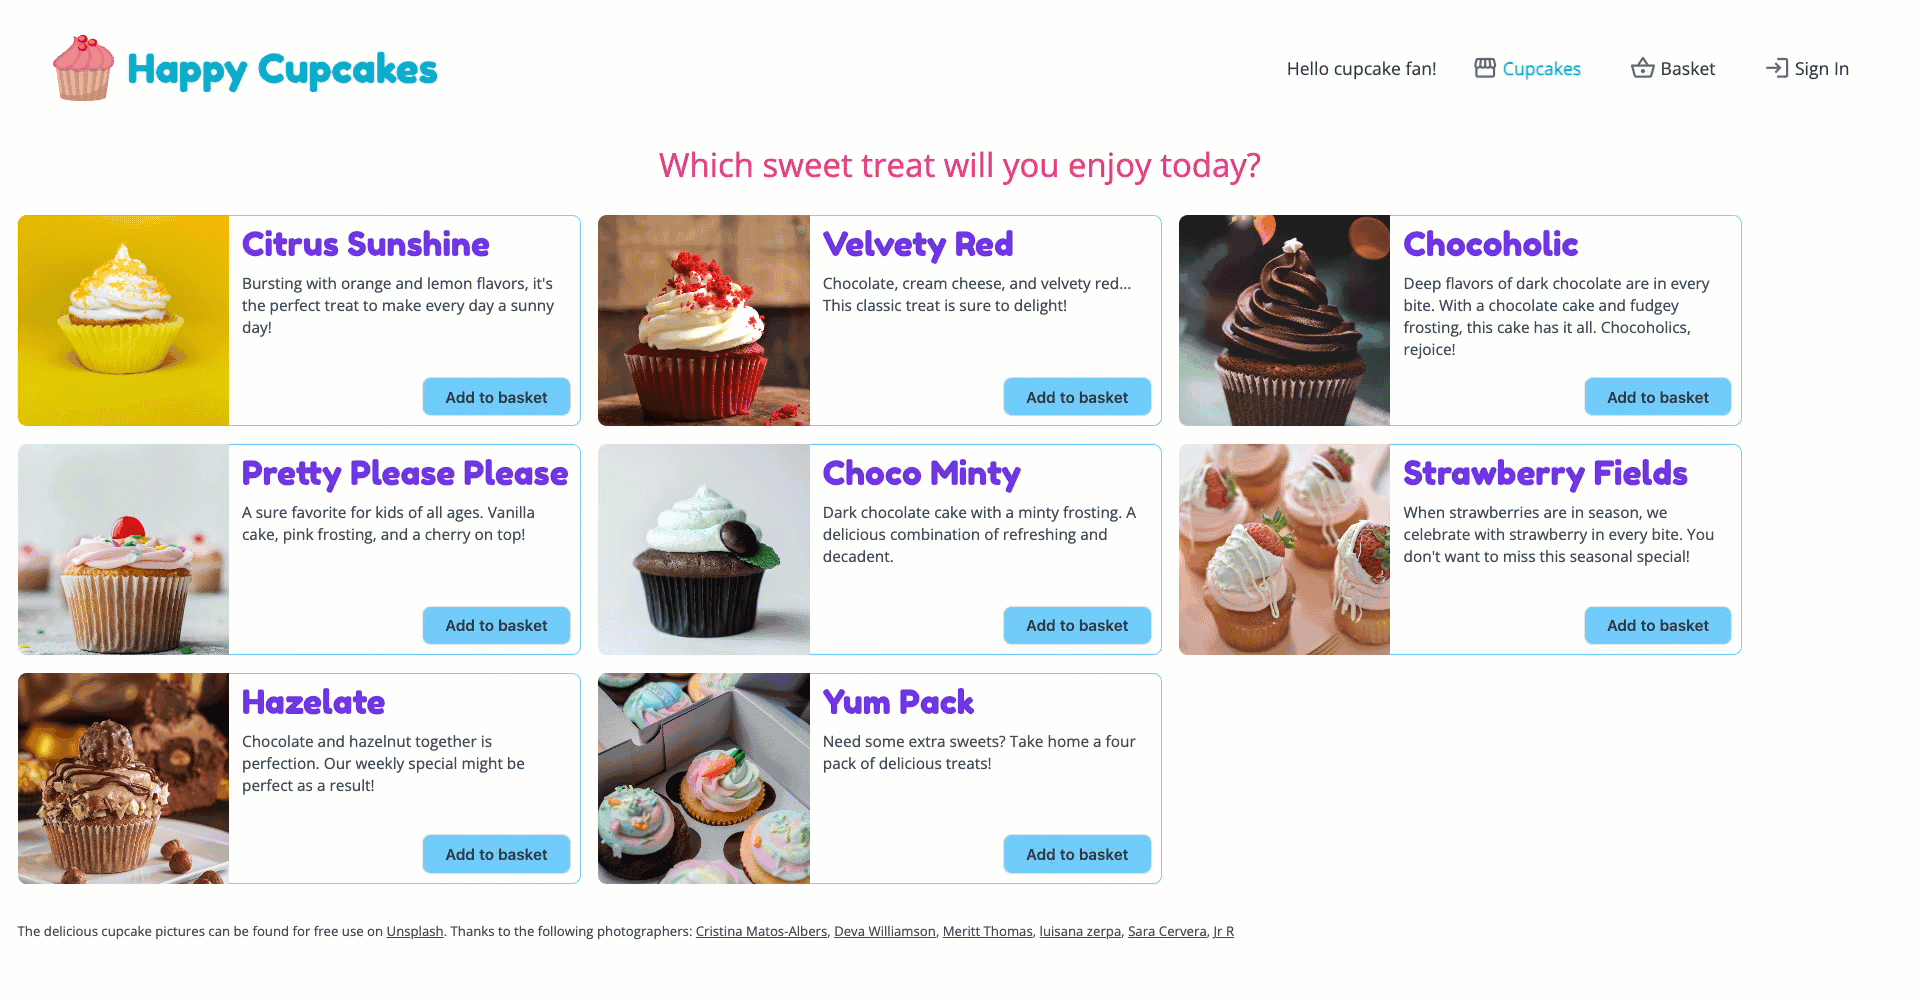 Animated gif of sign-in from a cupcake site